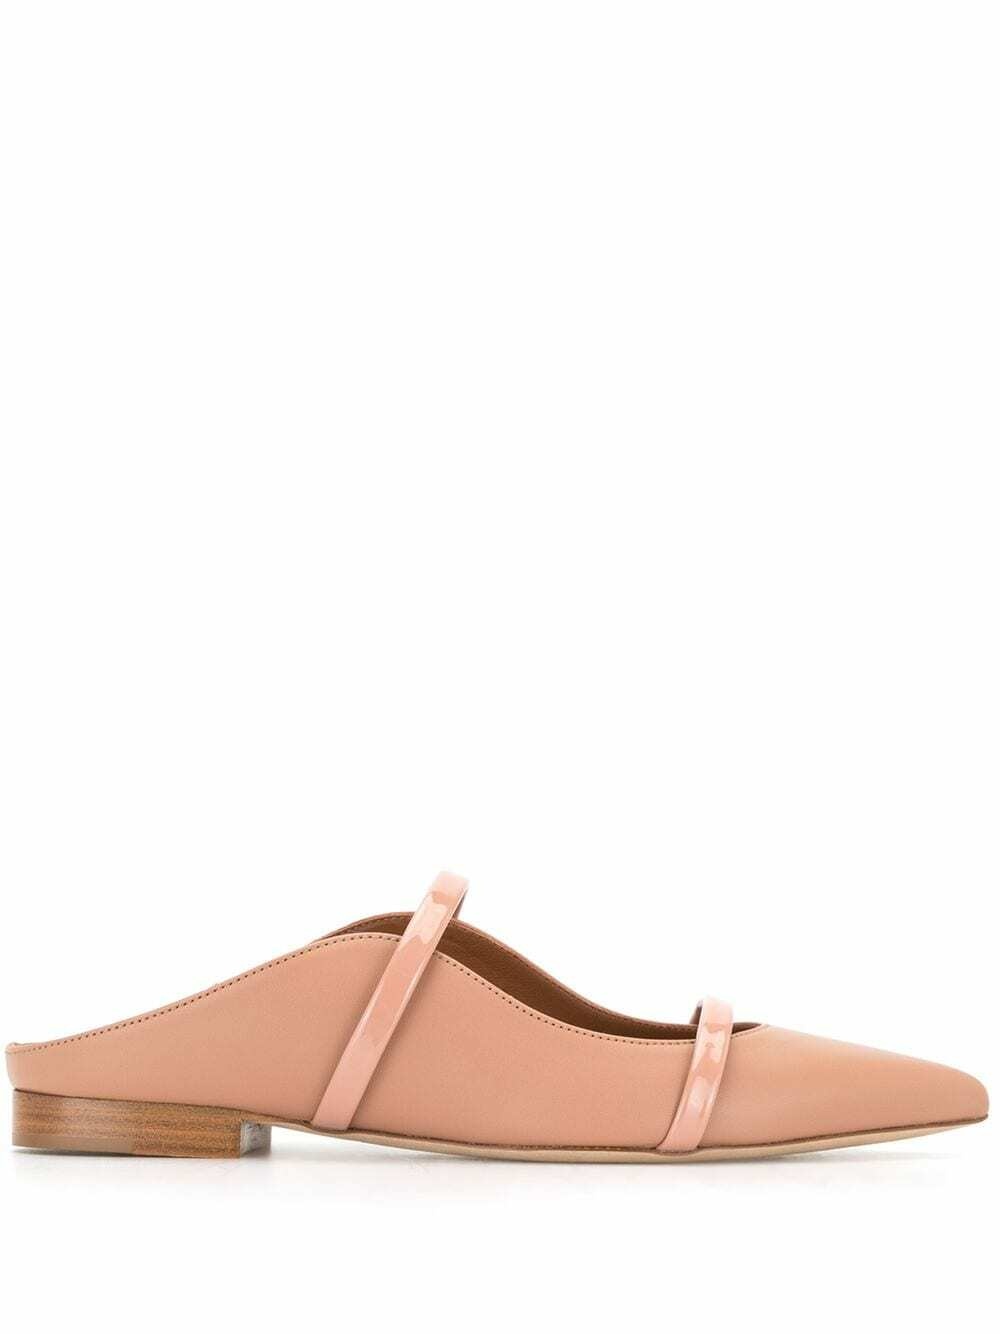 MALONE SOULIERS - Maureen Leather Slippers Malone Souliers